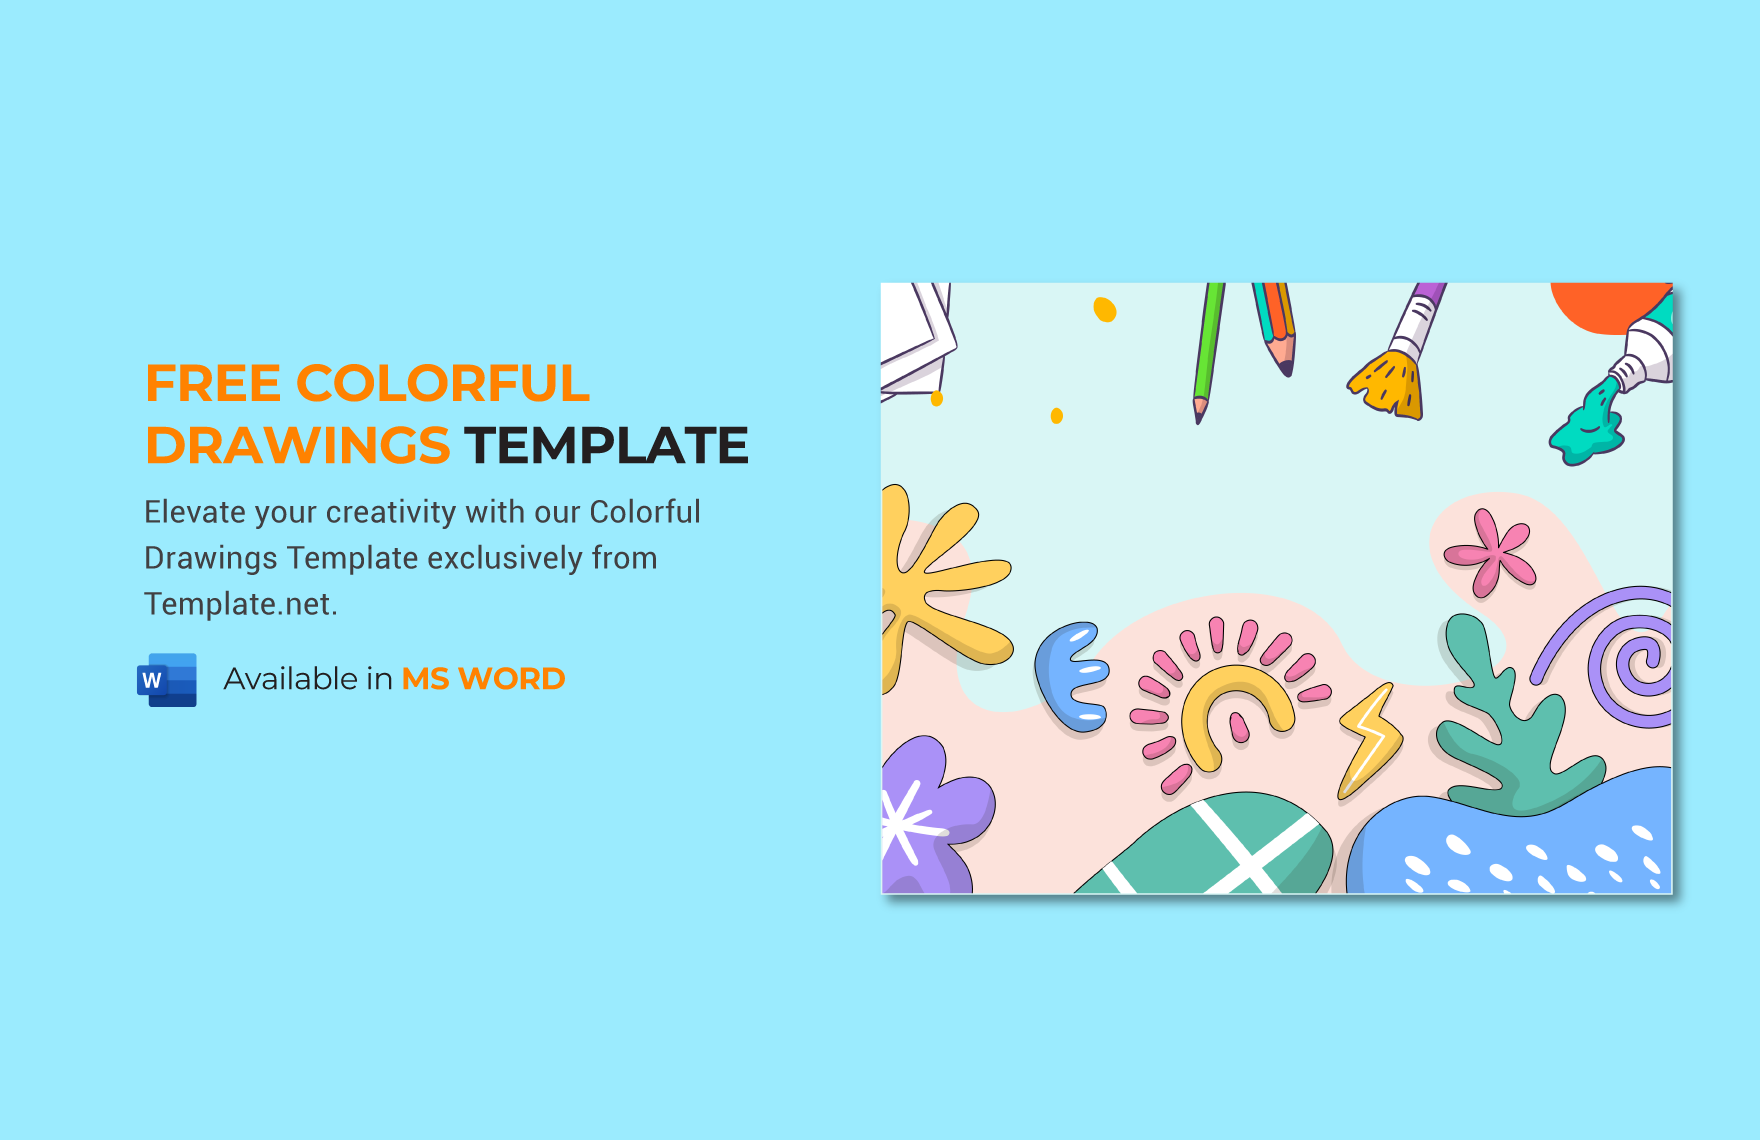 Free Colorful Drawings Template